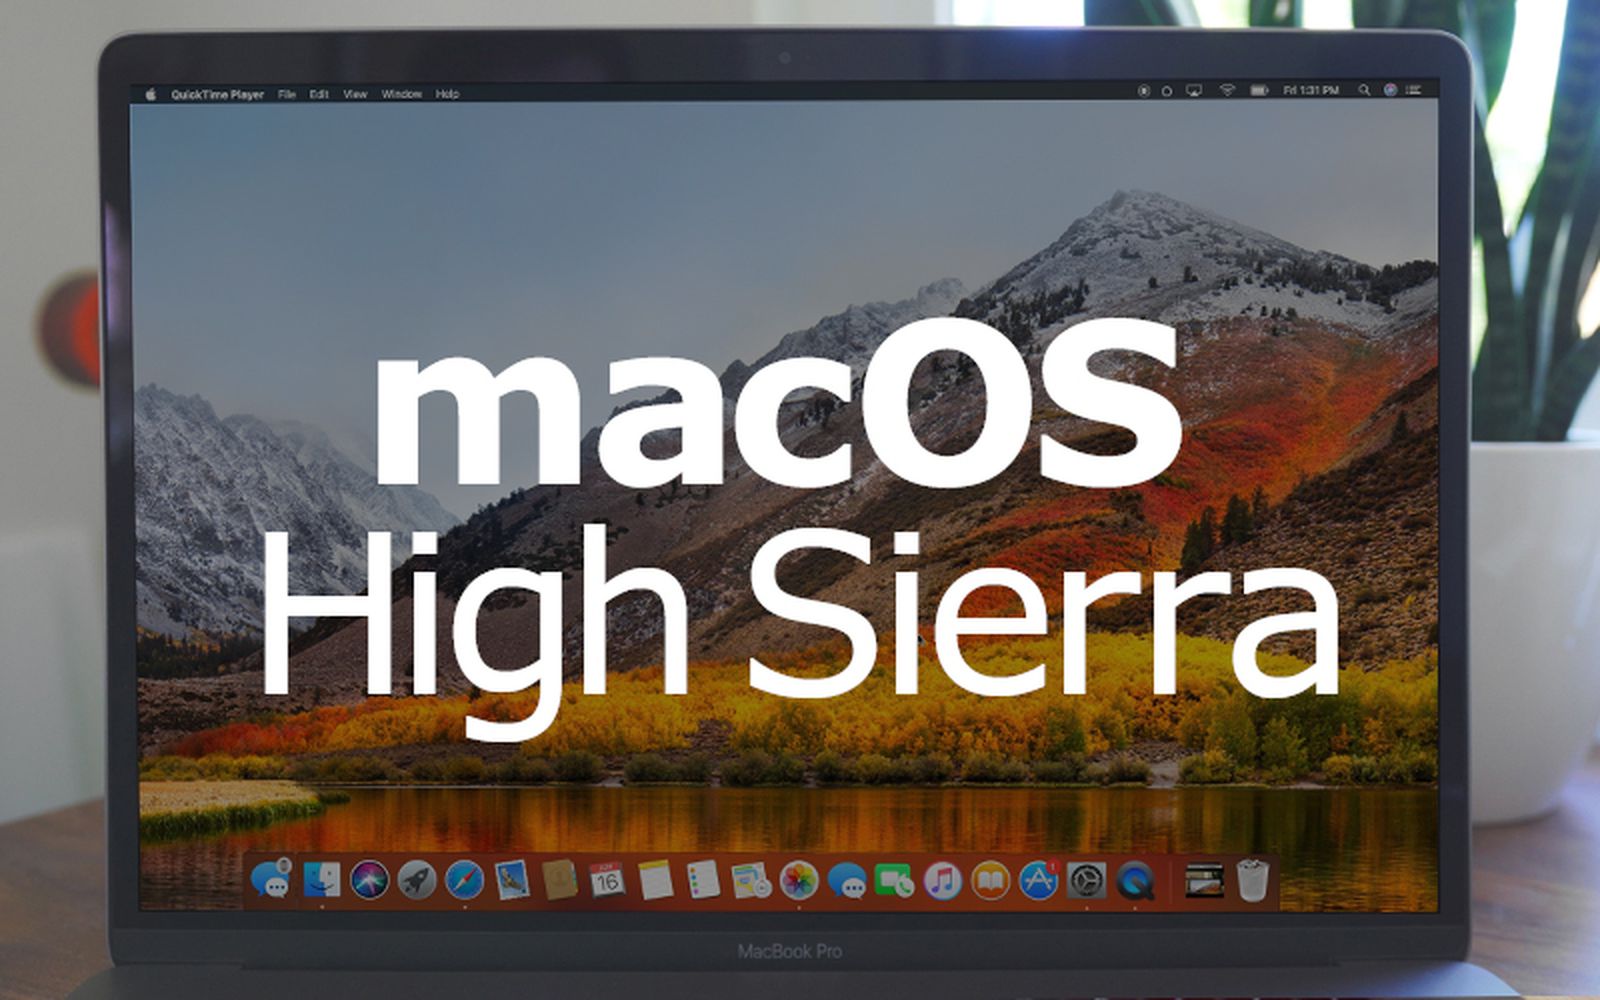 looking for software programs for mac with high sierra operating systems